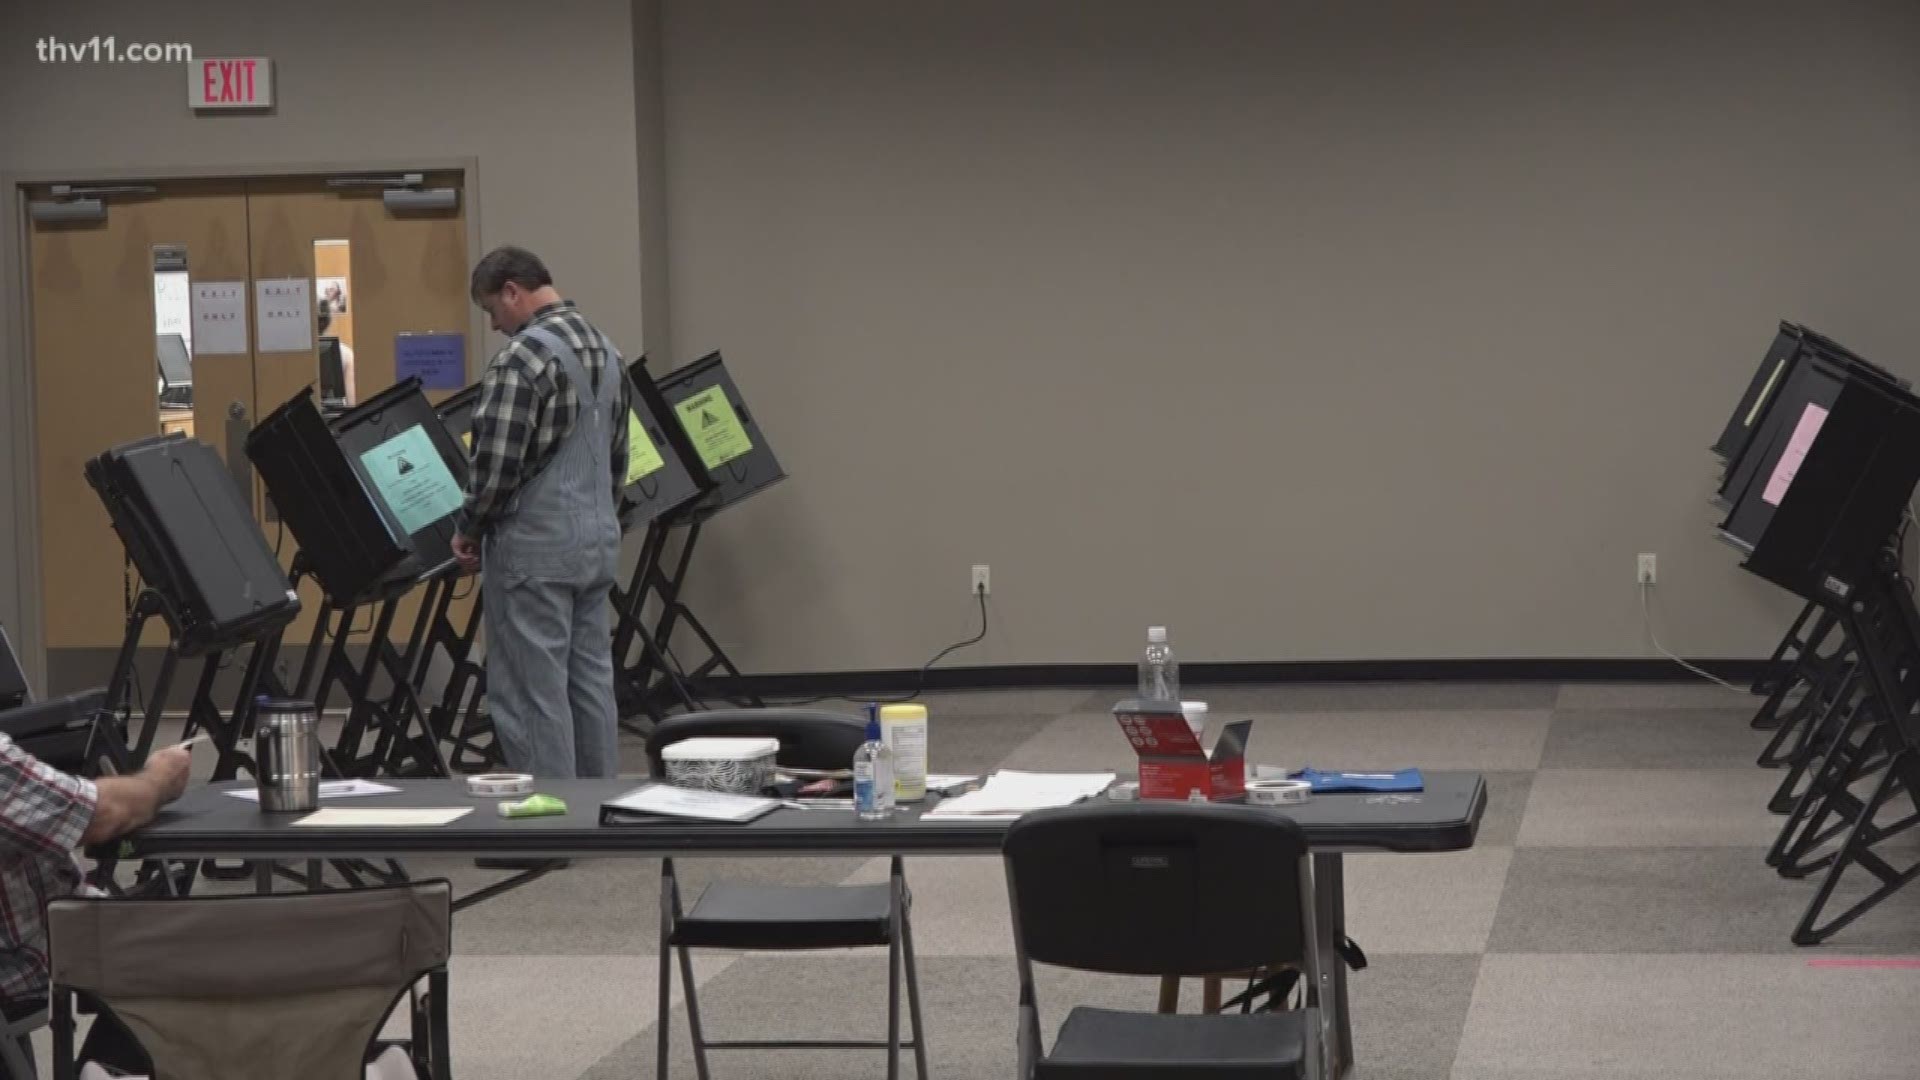 New voting equipment will make the process easier and faster, but county officials want to avoid mistakes in the roll-out